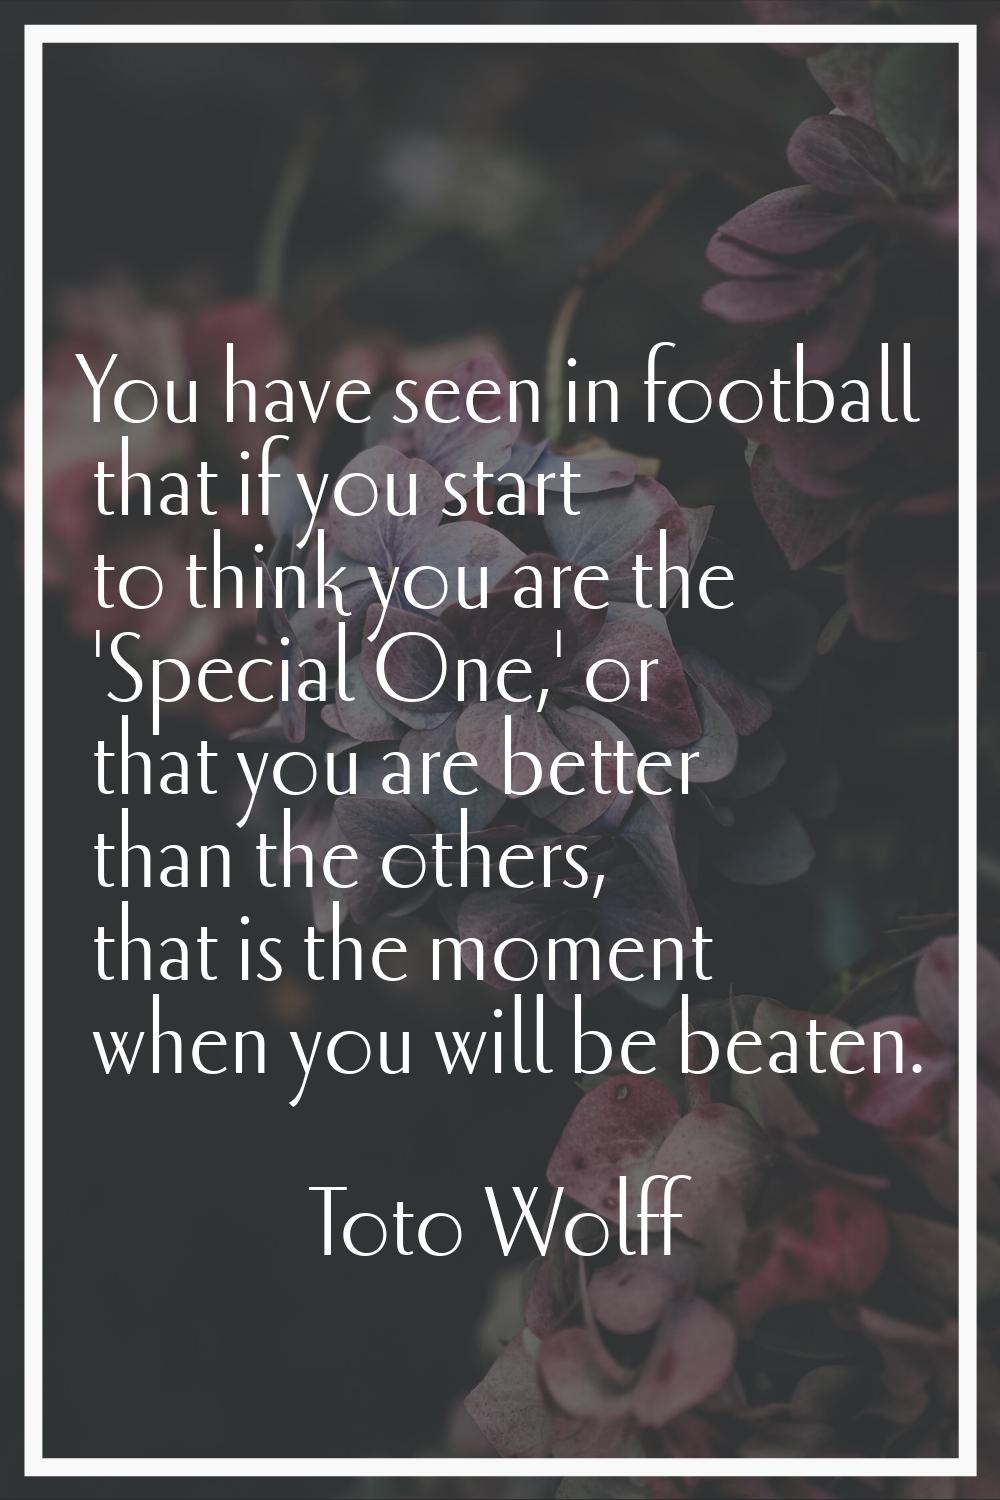 You have seen in football that if you start to think you are the 'Special One,' or that you are bet